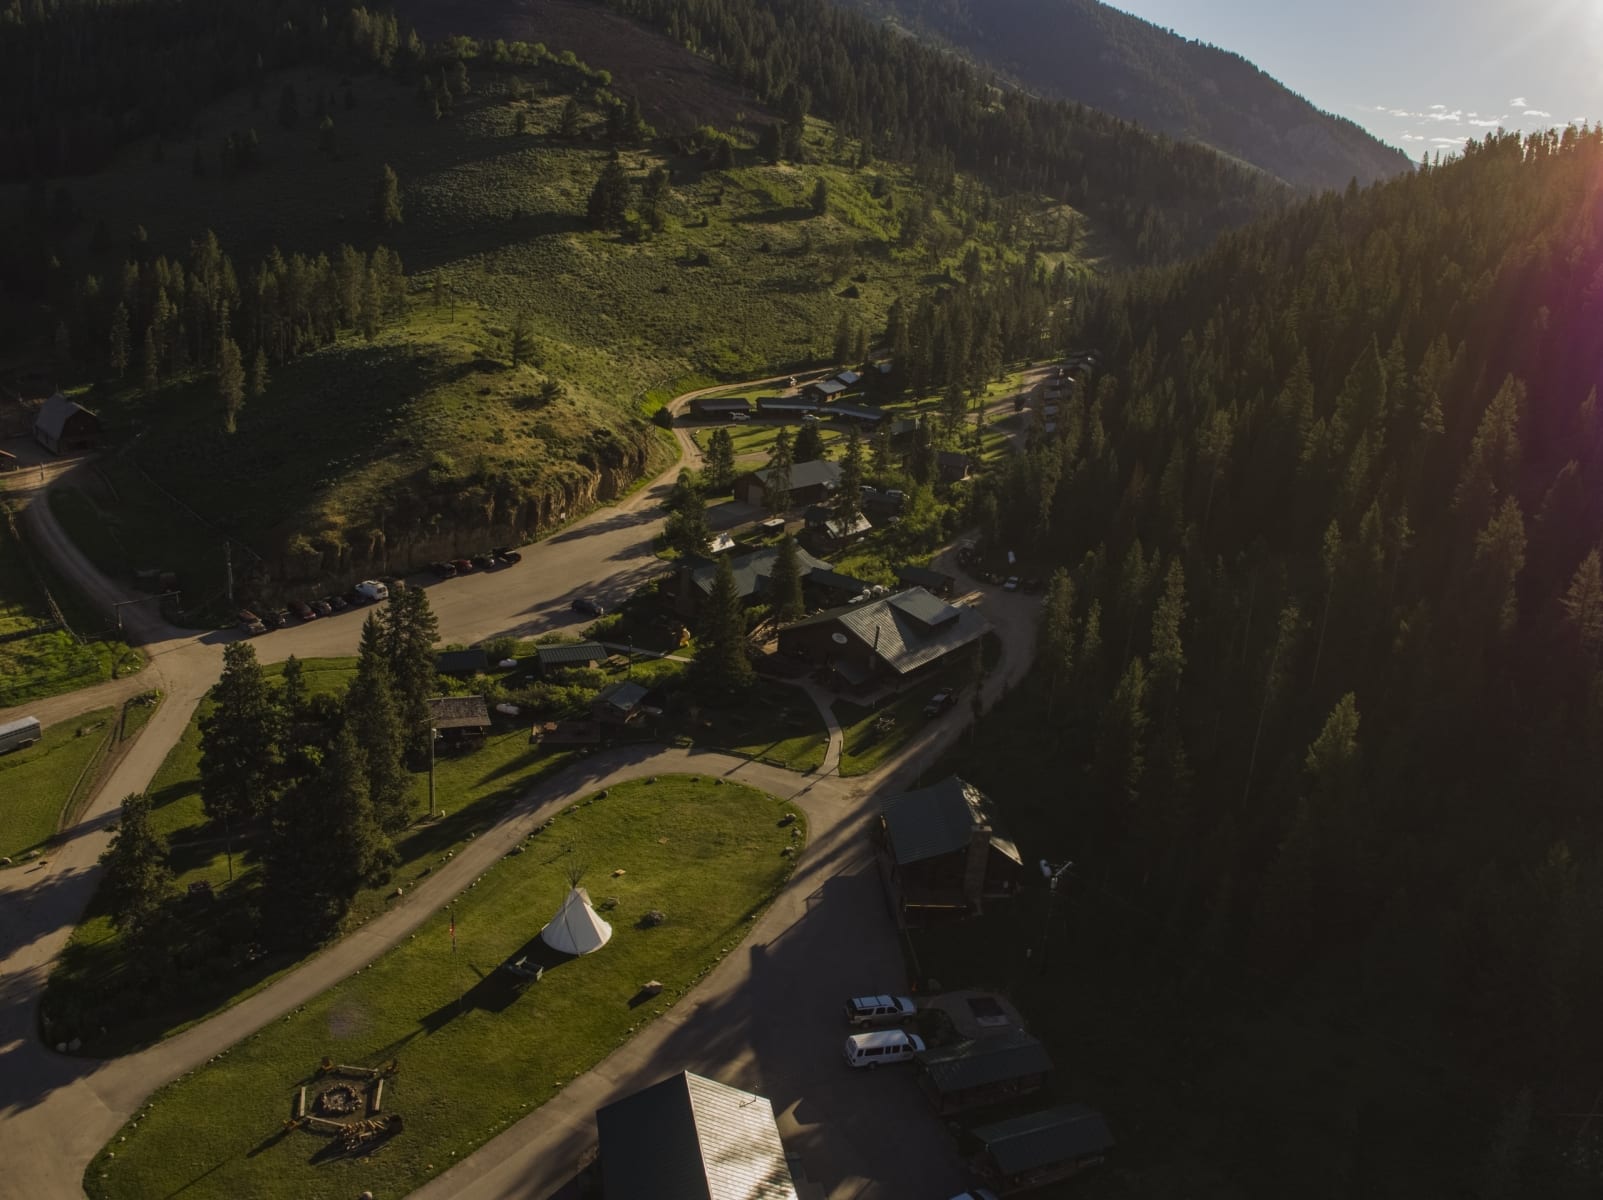 Drone photo over 320 ranch showing cabins, center lawn, and Montana's Gallatin National Forest.